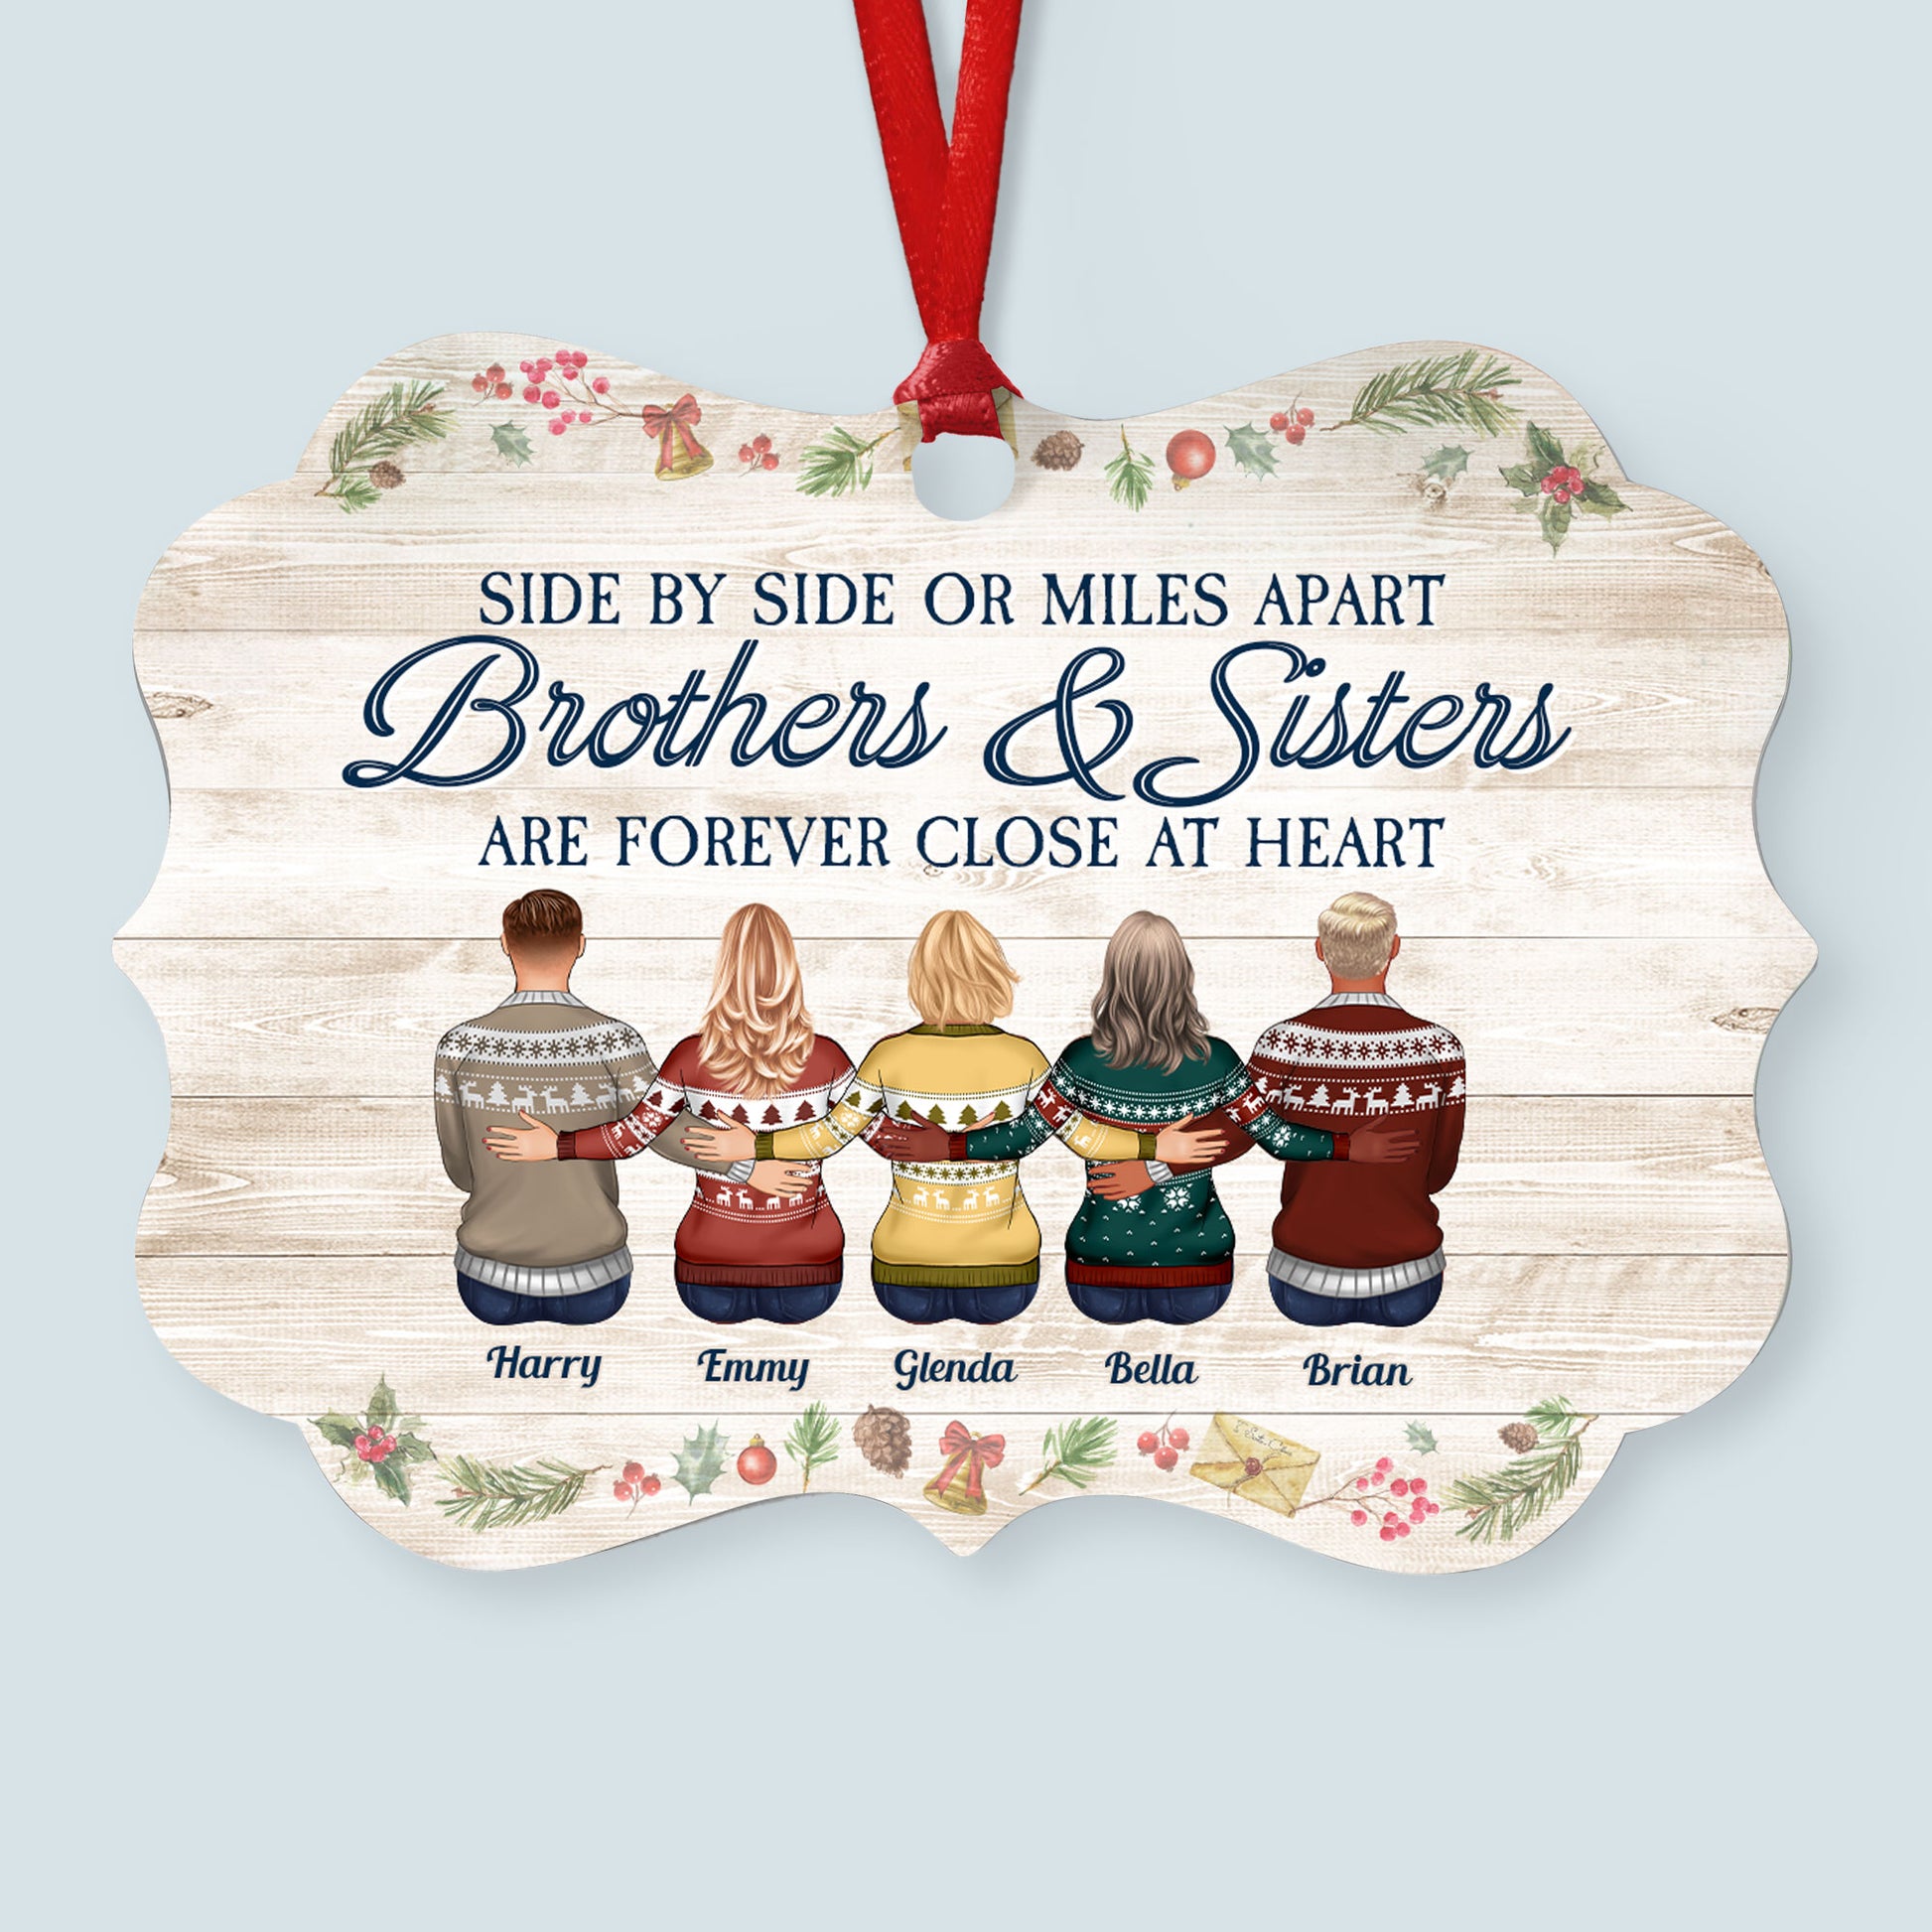 Brothers & Sisters Are Forever Close At Heart - Personalized Aluminum Ornament - Christmas Gift Family Ornament For Dad, Mom, Brothers, Sisters - Family Hugging